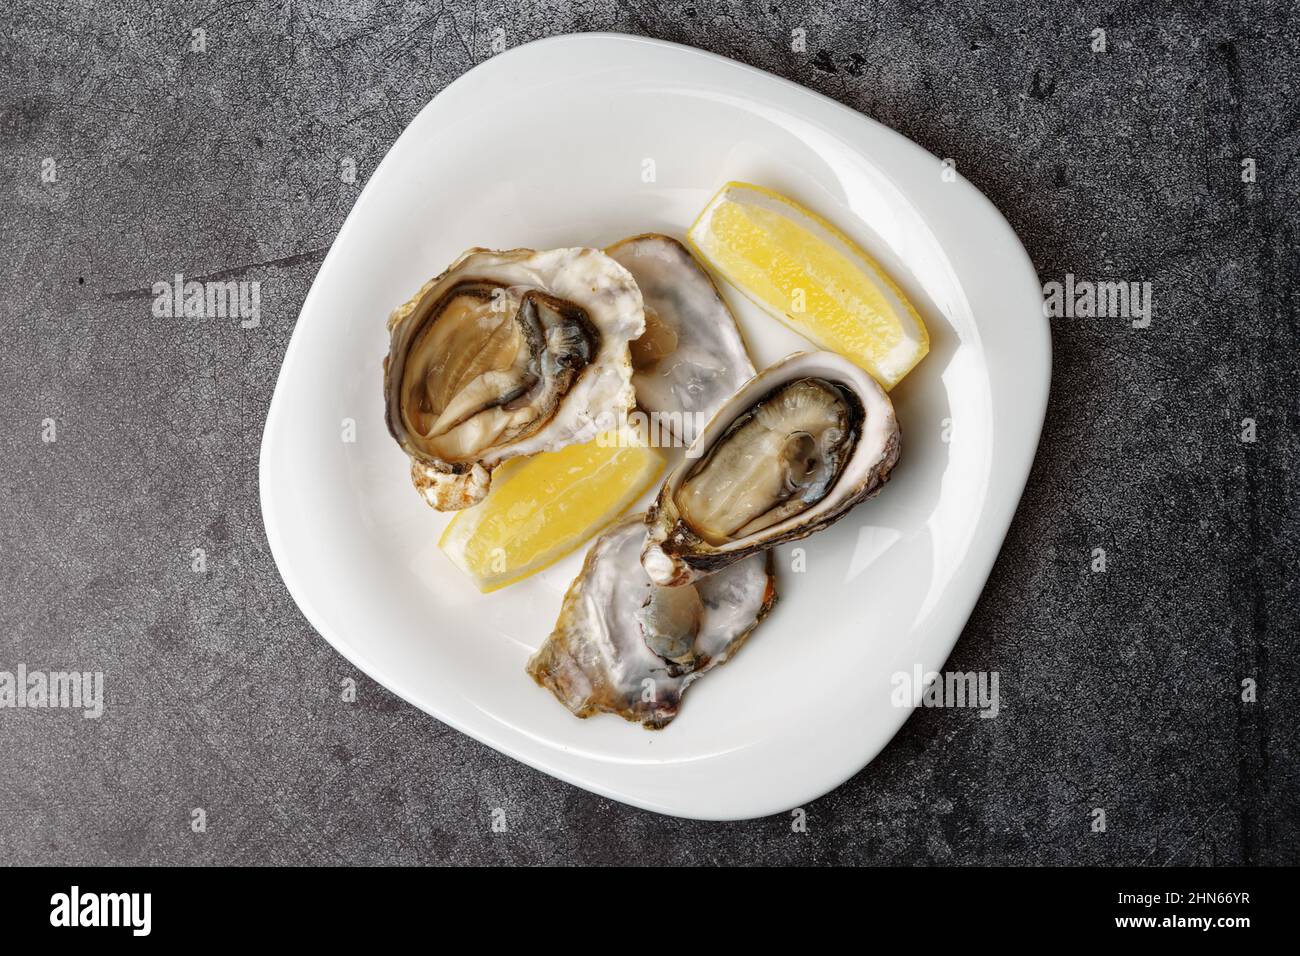 Oysters in plate on grey concrete background shot from above Stock Photo